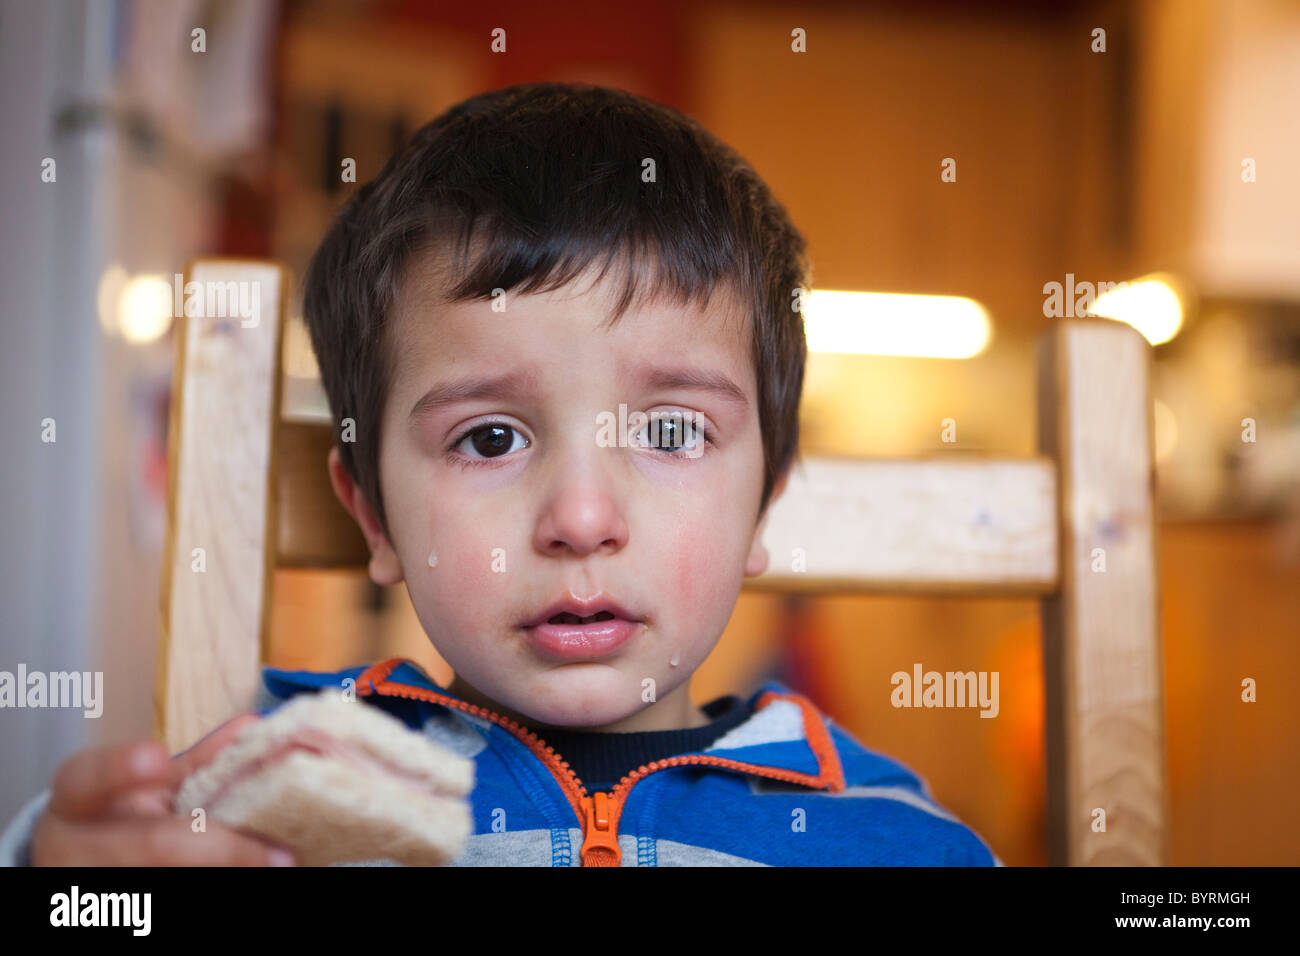 2 year old boy crying with tears running down his cheeks Stock Photo